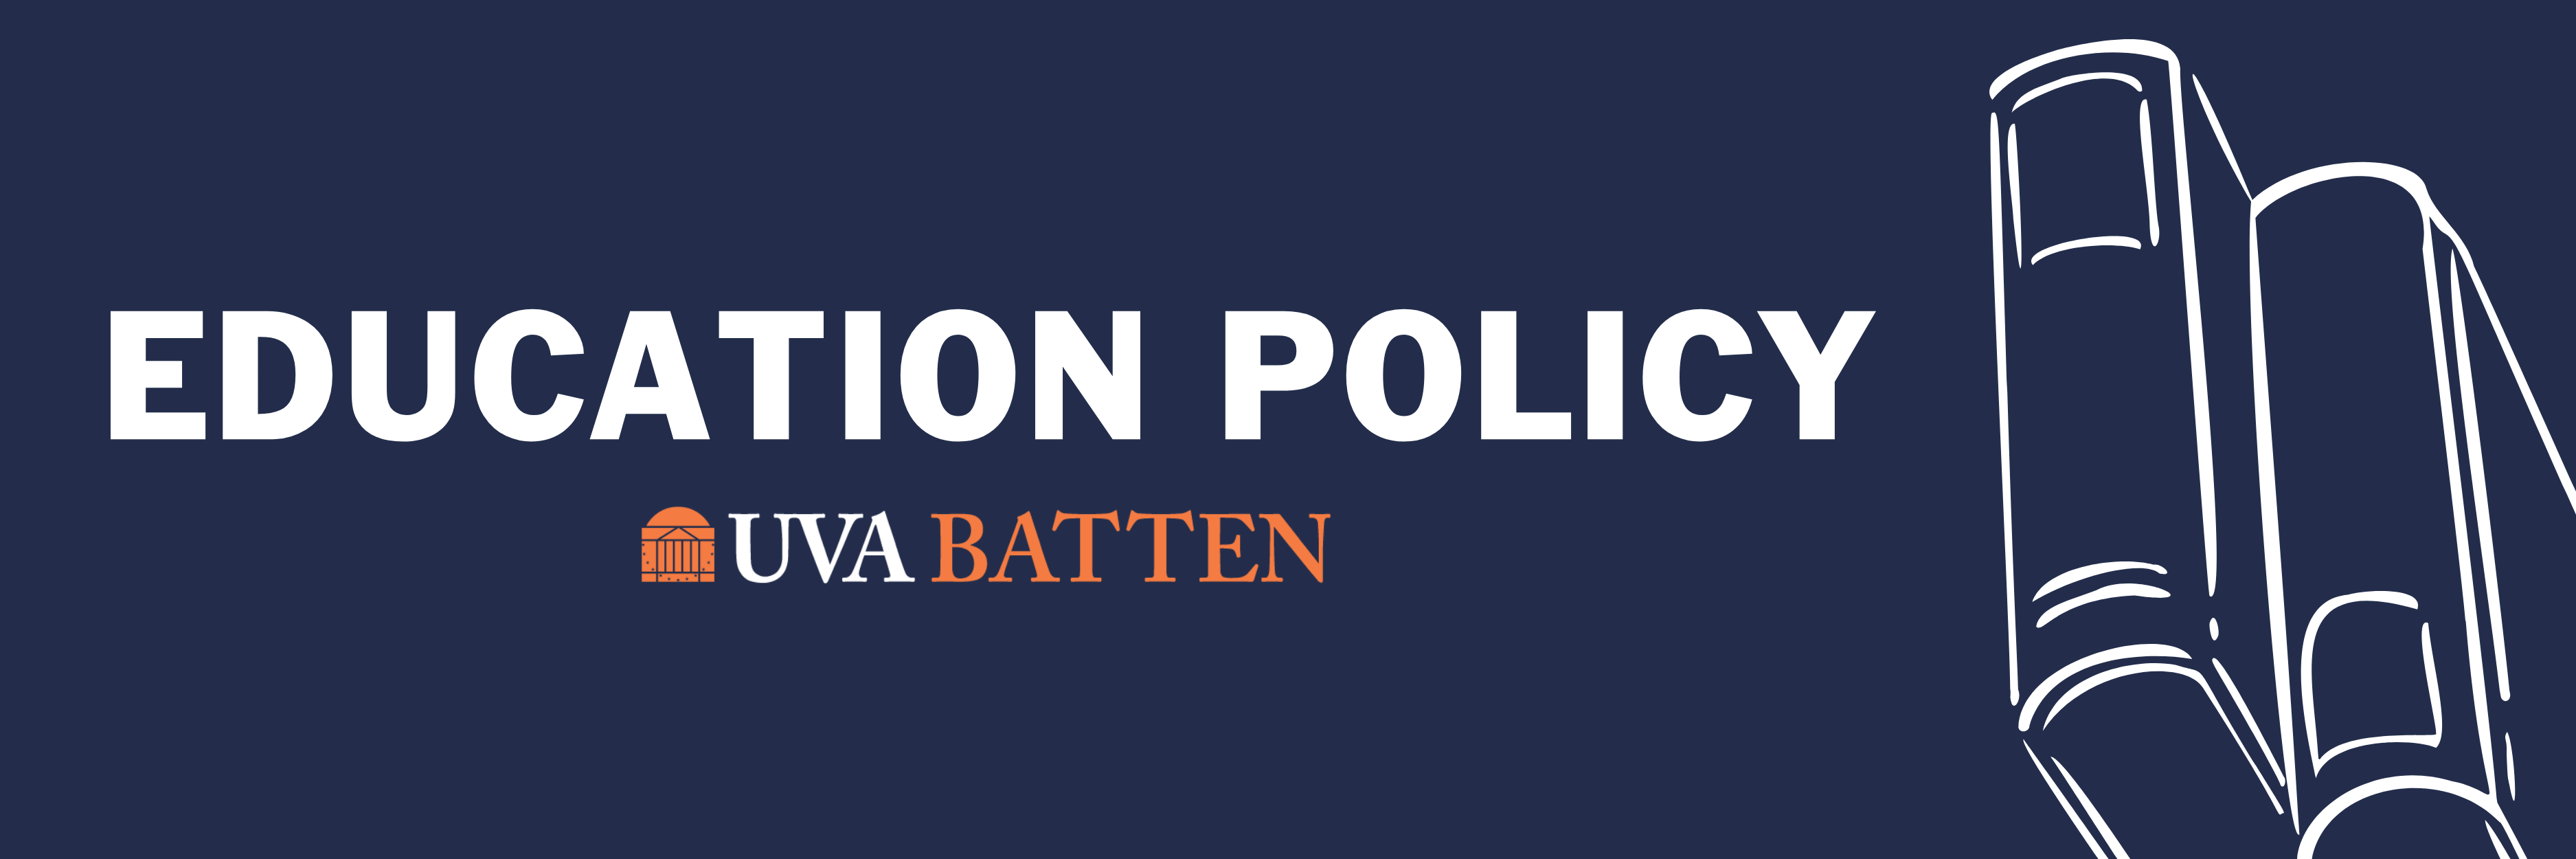 UVA Batten Education Policy Banner pictured with books.